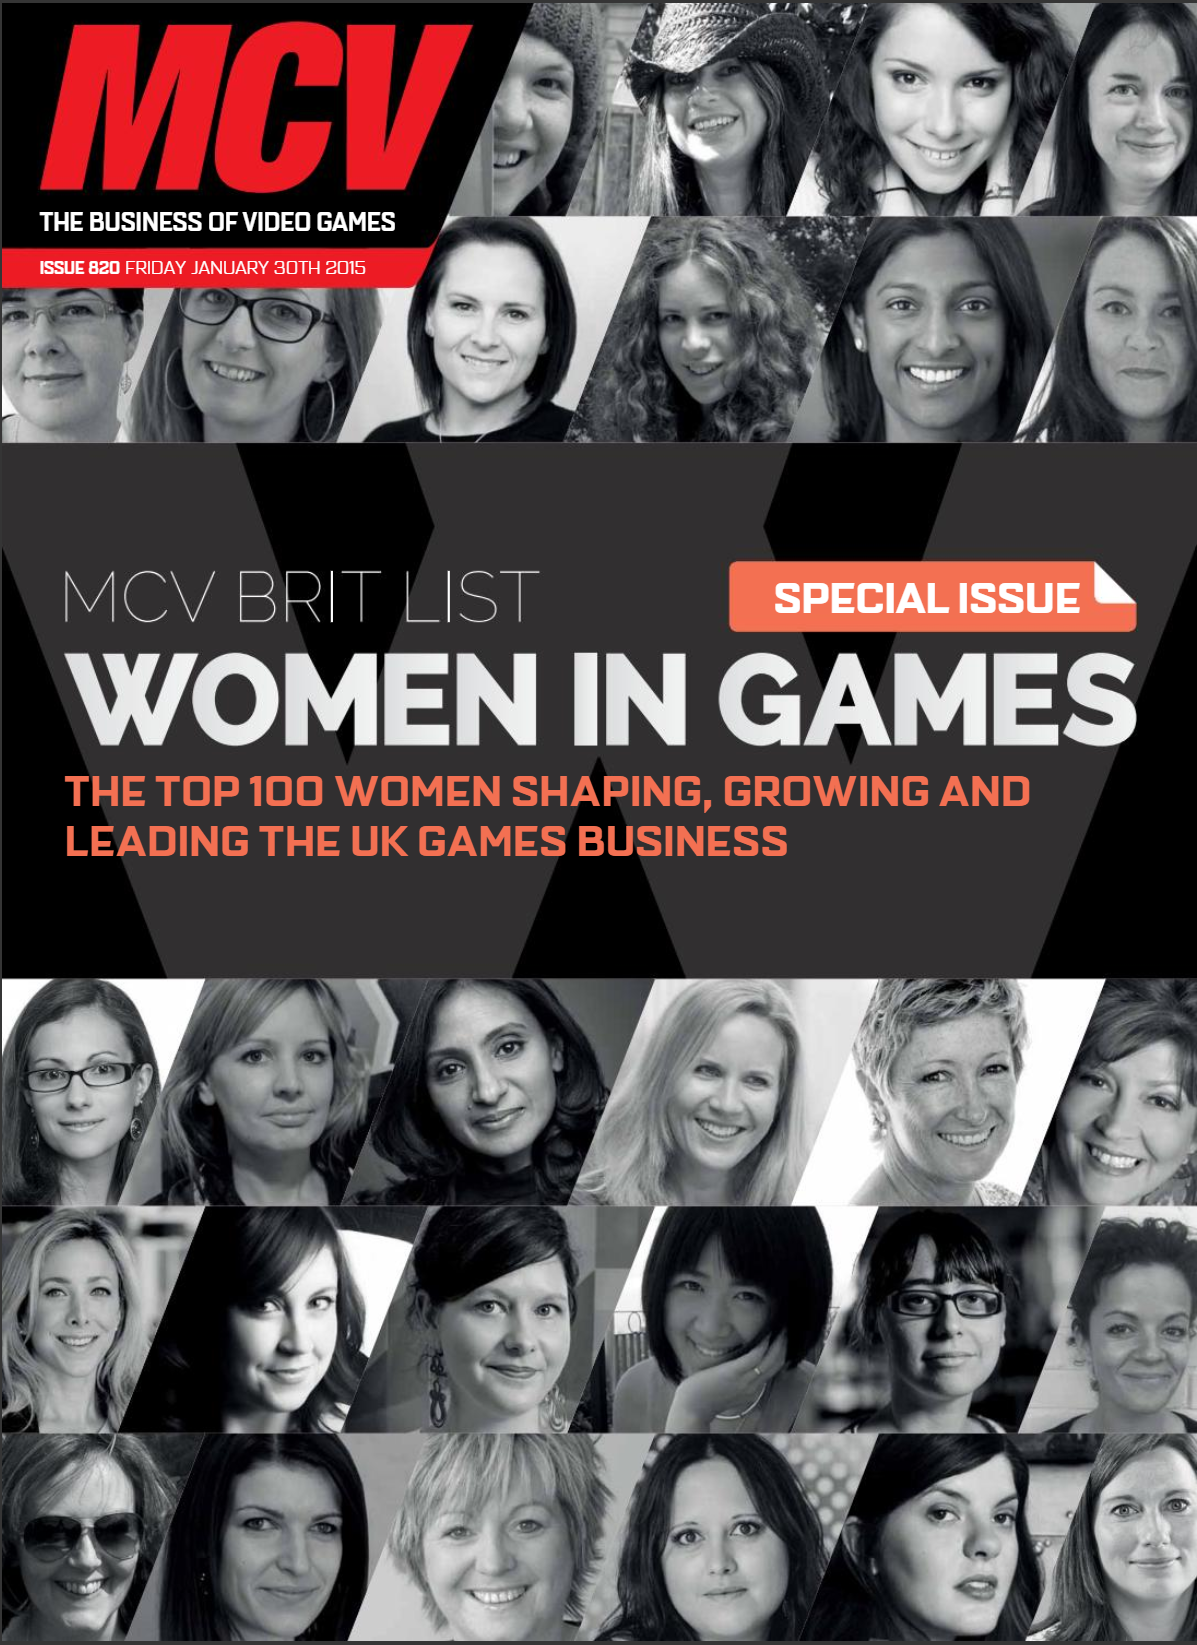 Named one of MCV's Top 100 Women in Games